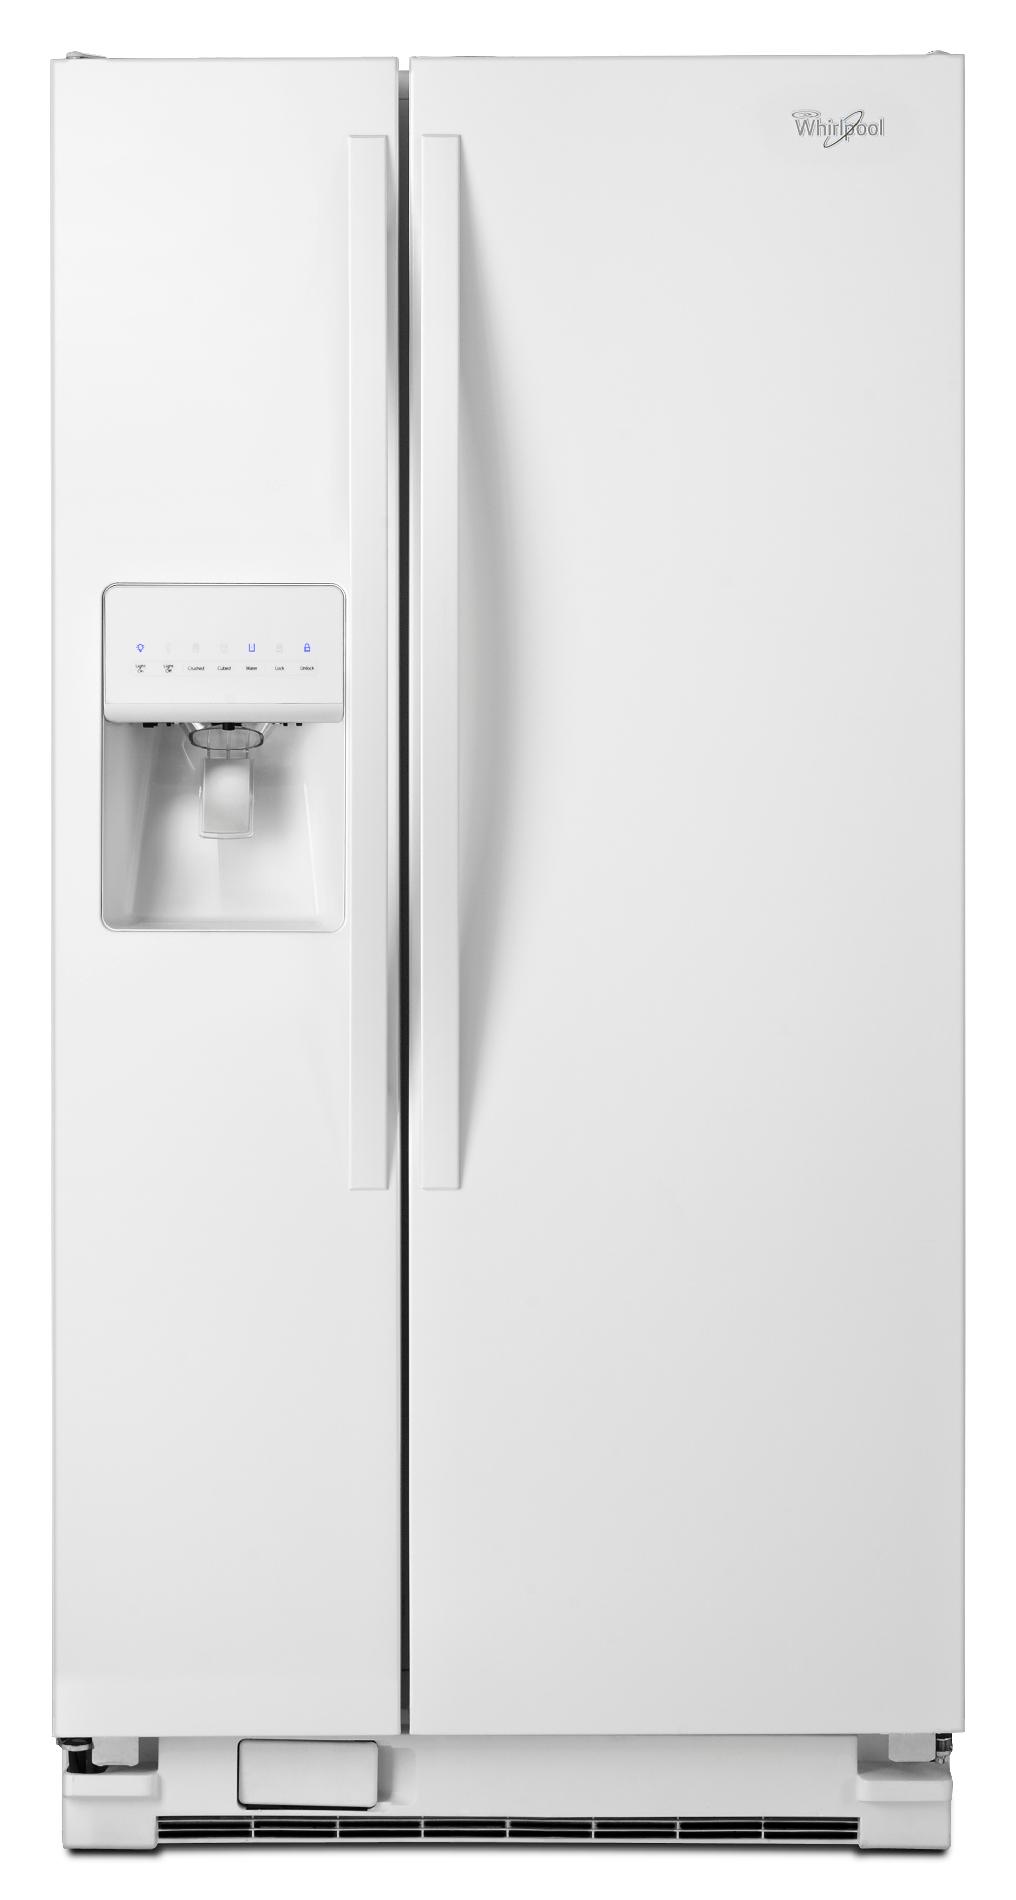 Whirlpool 22.0 cu. ft. Side-by-Side Refrigerator w/ Accu-Chill - White